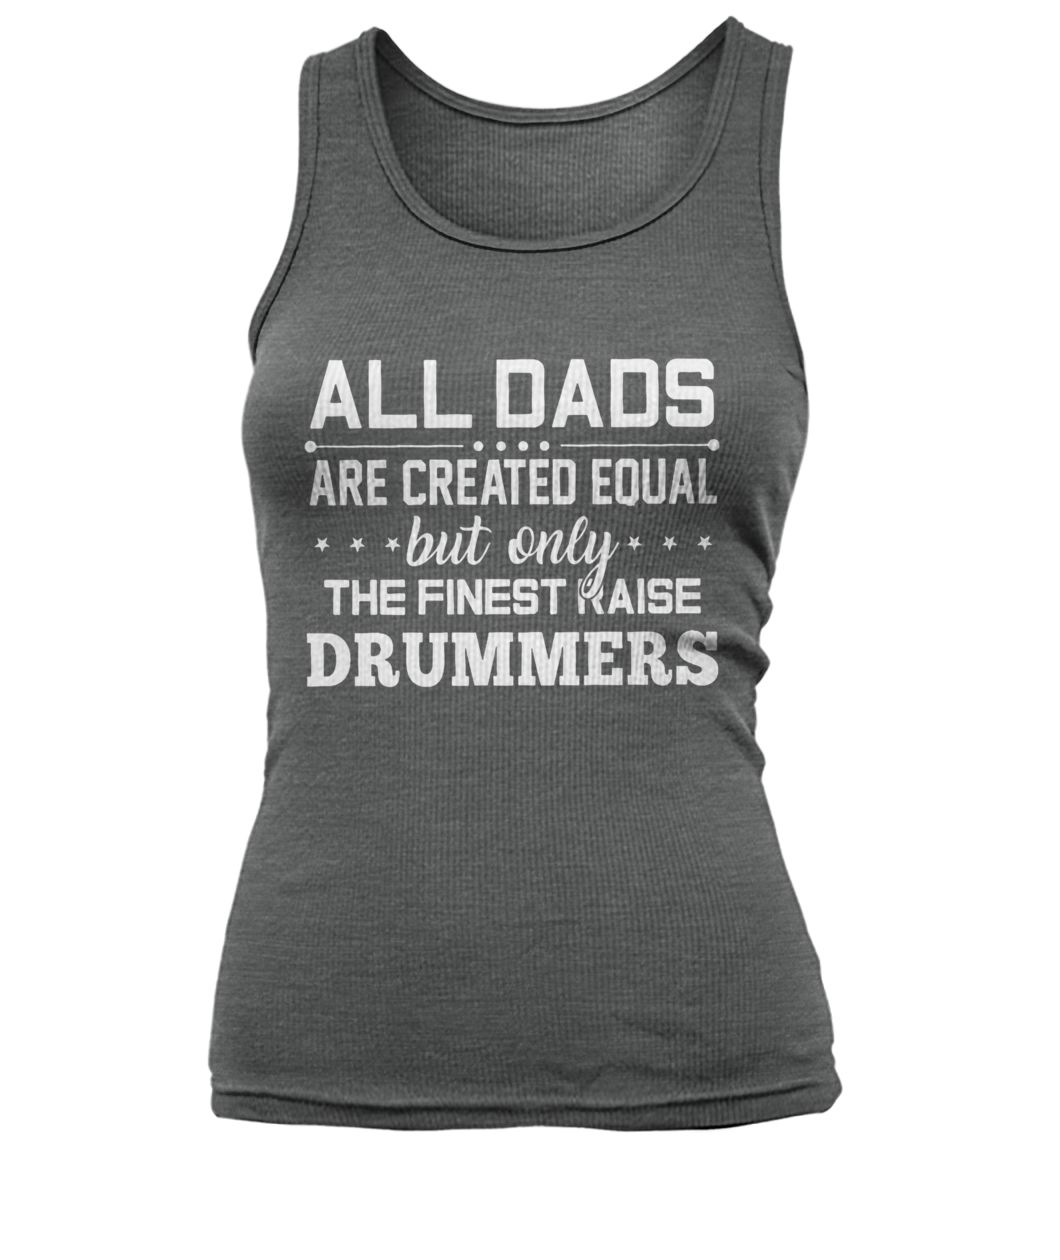 All dads are created equal but only the finest raise drummers women's tank top